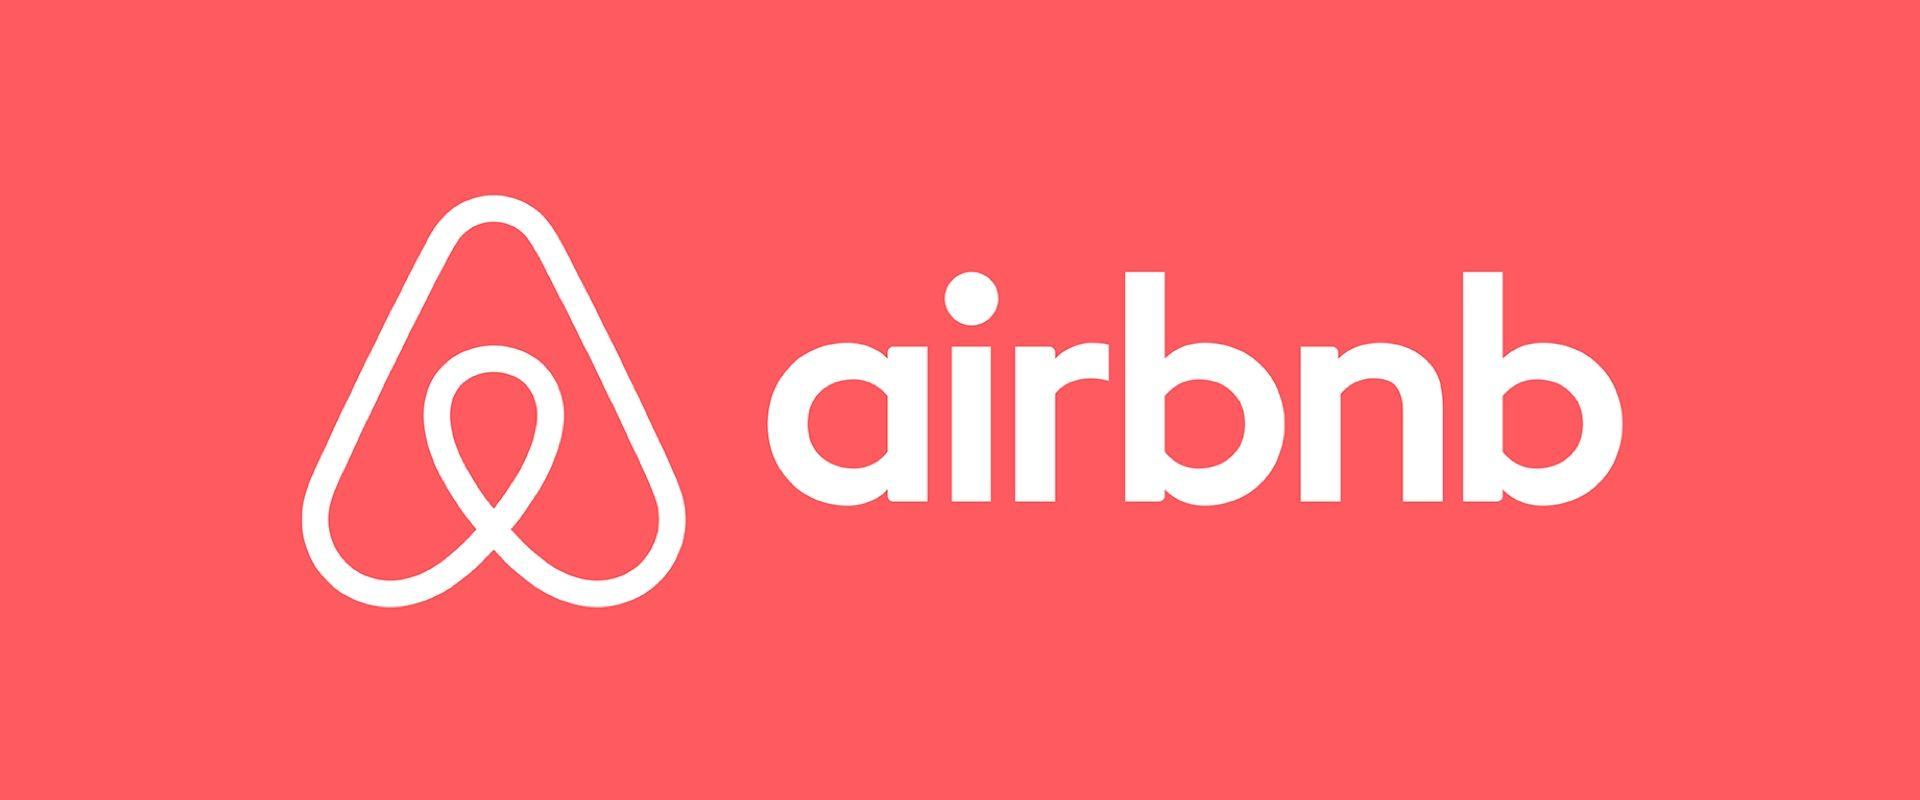 Airbnb App Logo - Airbnb: App Review